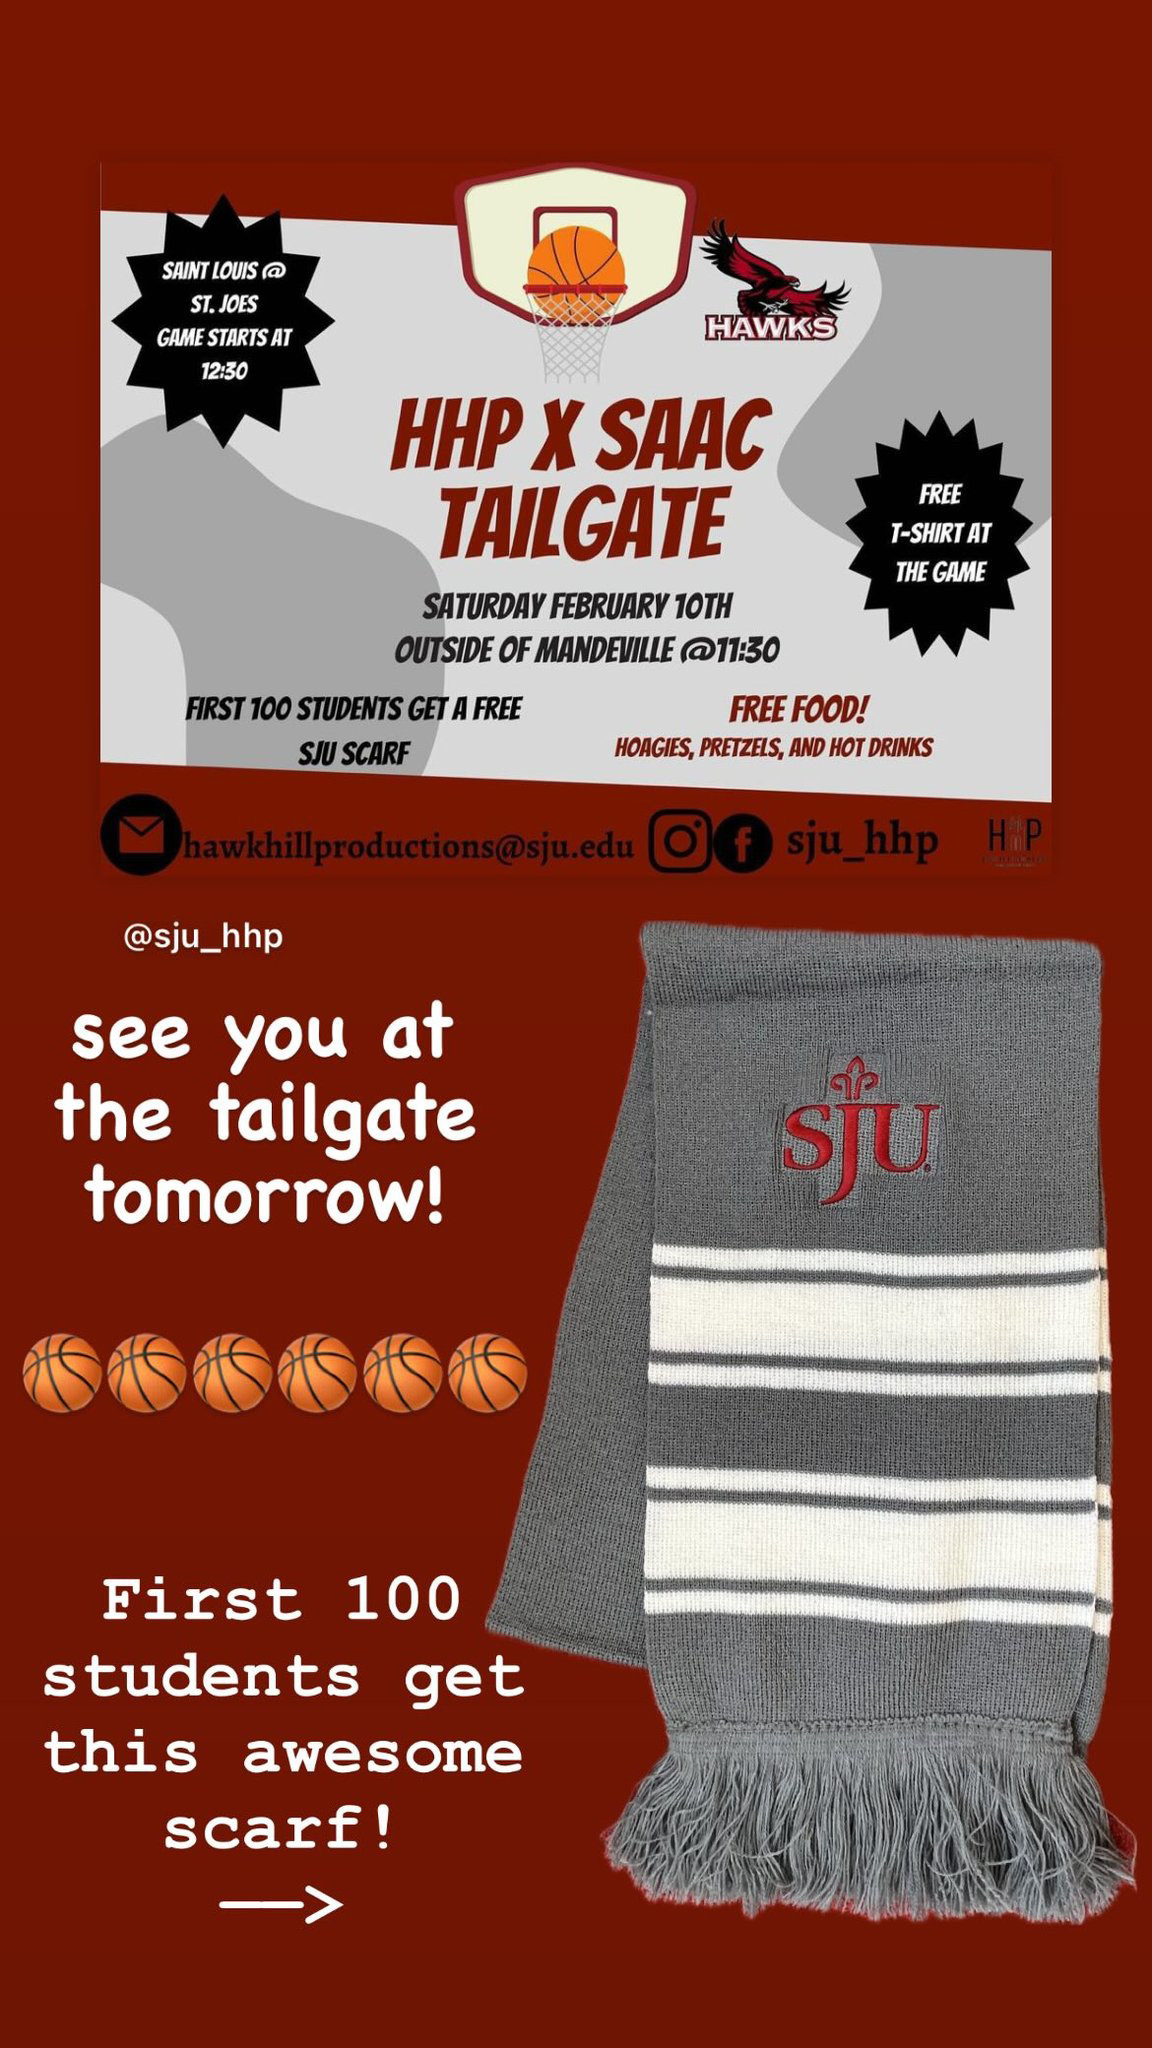 This is an instagram story with a dark red background advertising a basketball game tailgate where they will be giving away SJU themes scarves. There is text on the left hand side showcasing event info and an image of the scarf that will be given away on the right hand side. At the top the flyer for the event is featured.